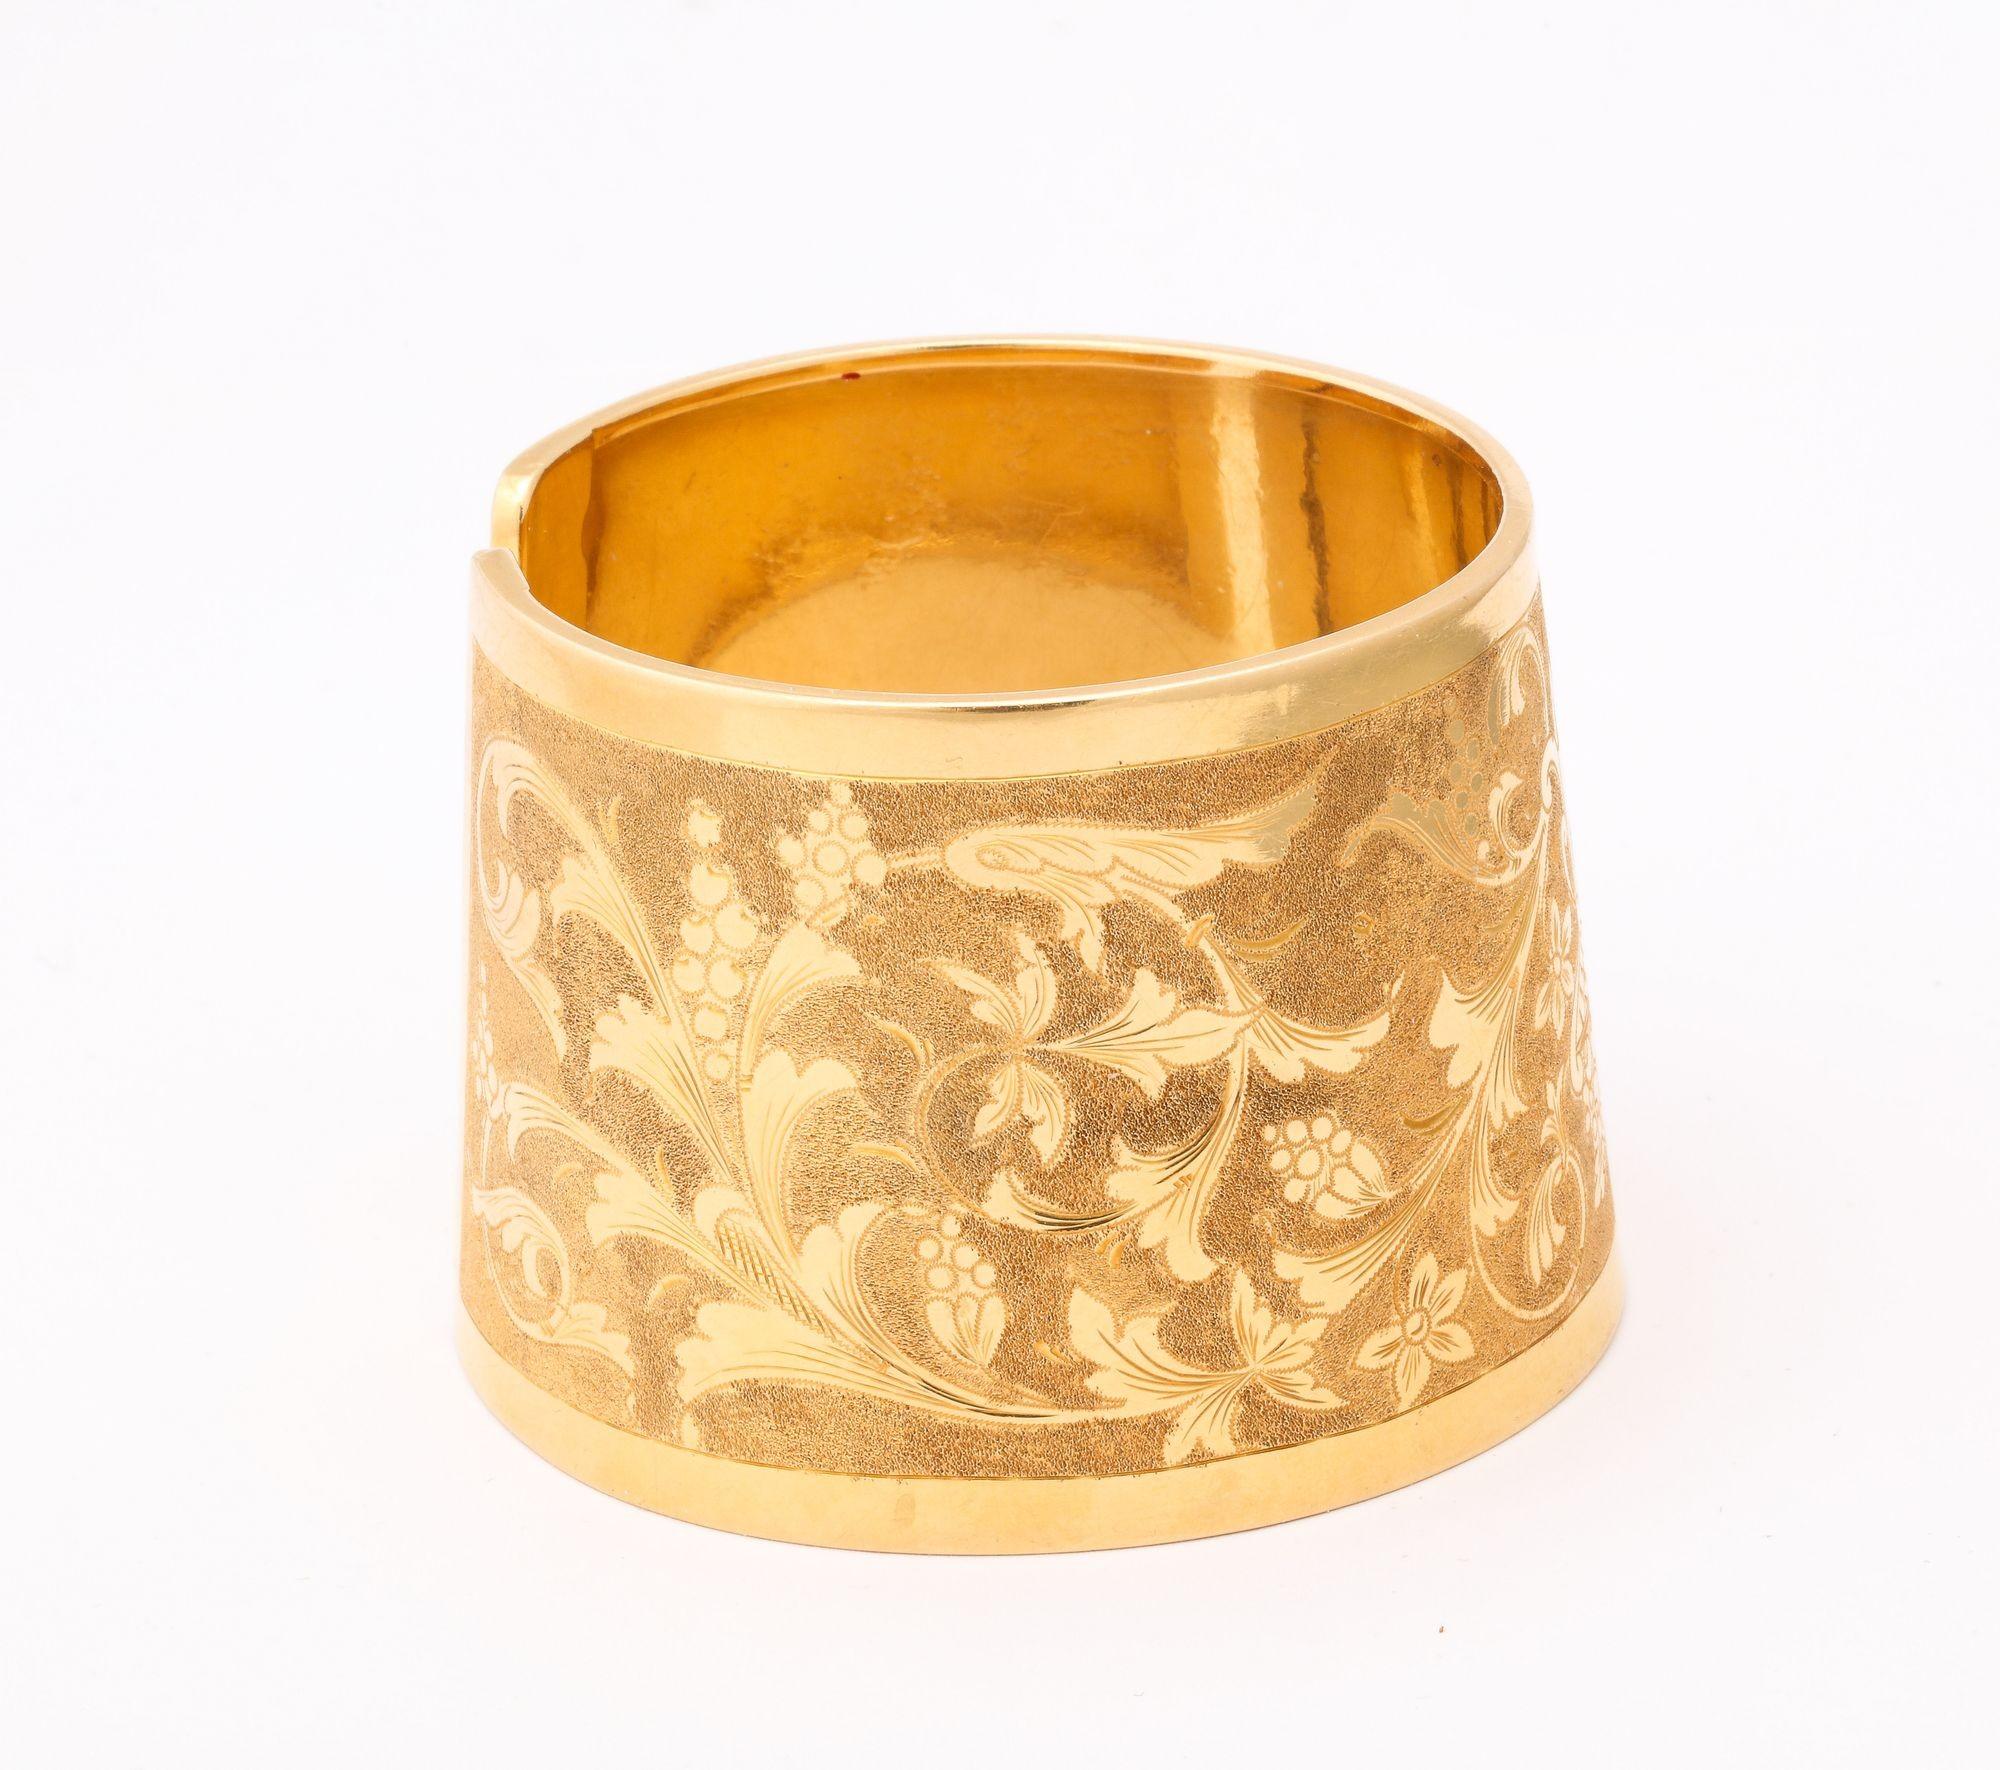 Italian 18 k Engraved Cuff with classical design of flowers and vines. This exceptional cuff can be worn on the wrist or the forearm it is beautifully executed and a one of a kind. It has a two-tone look.